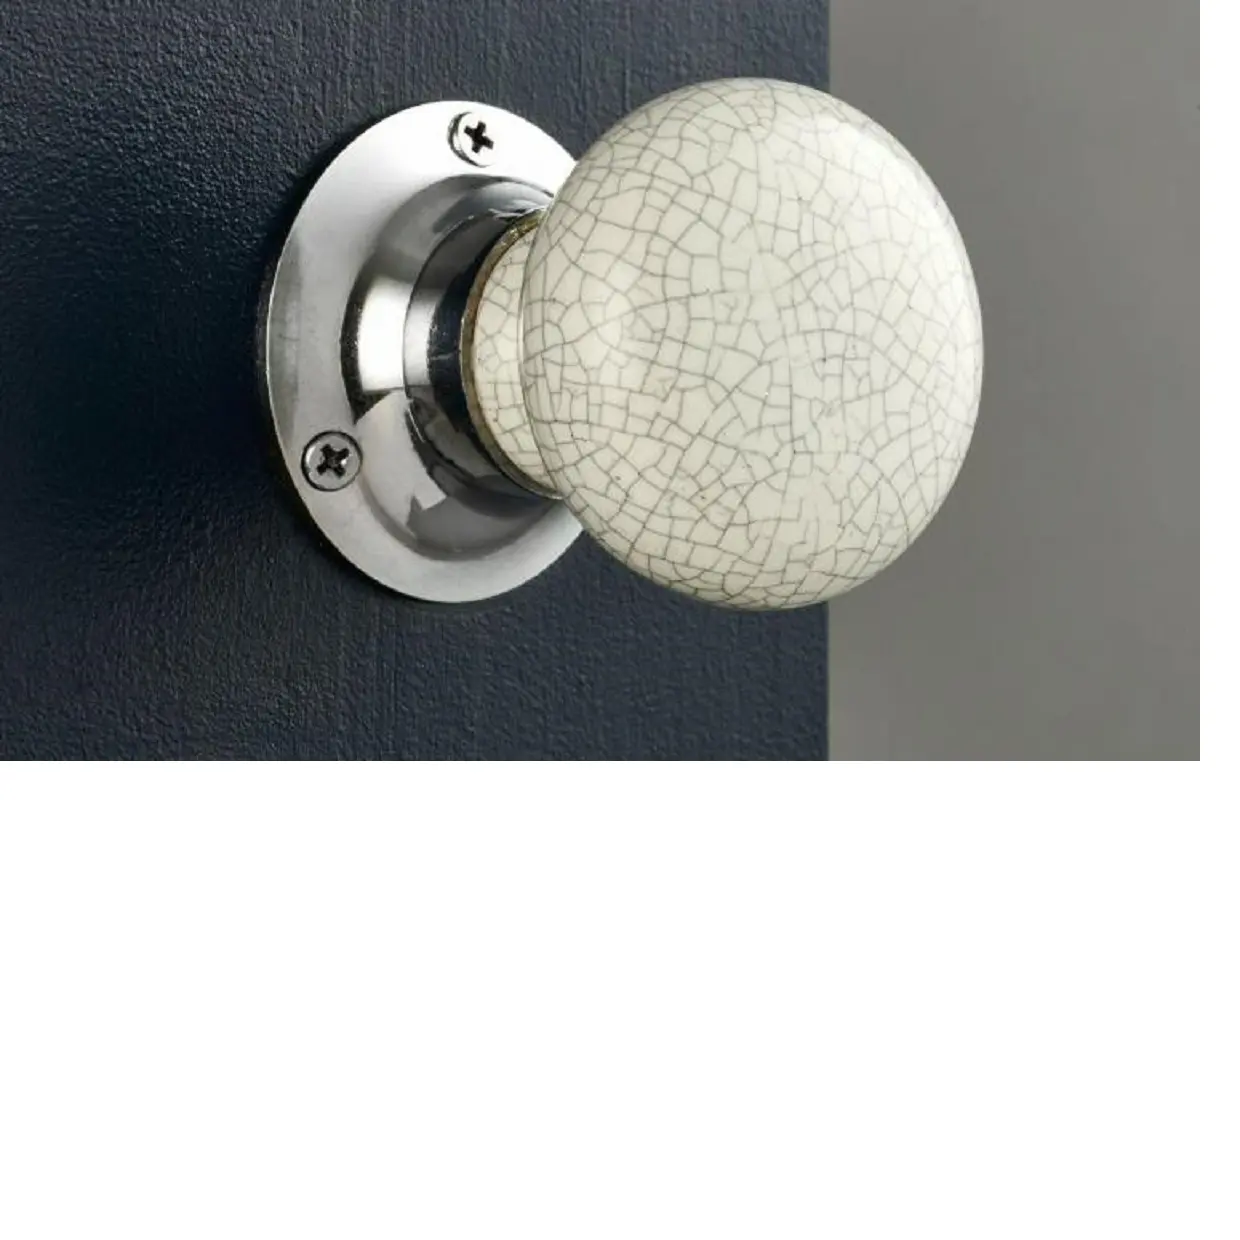 crackled ceramic door knobs with brass fittings ideal for furniture and home stores